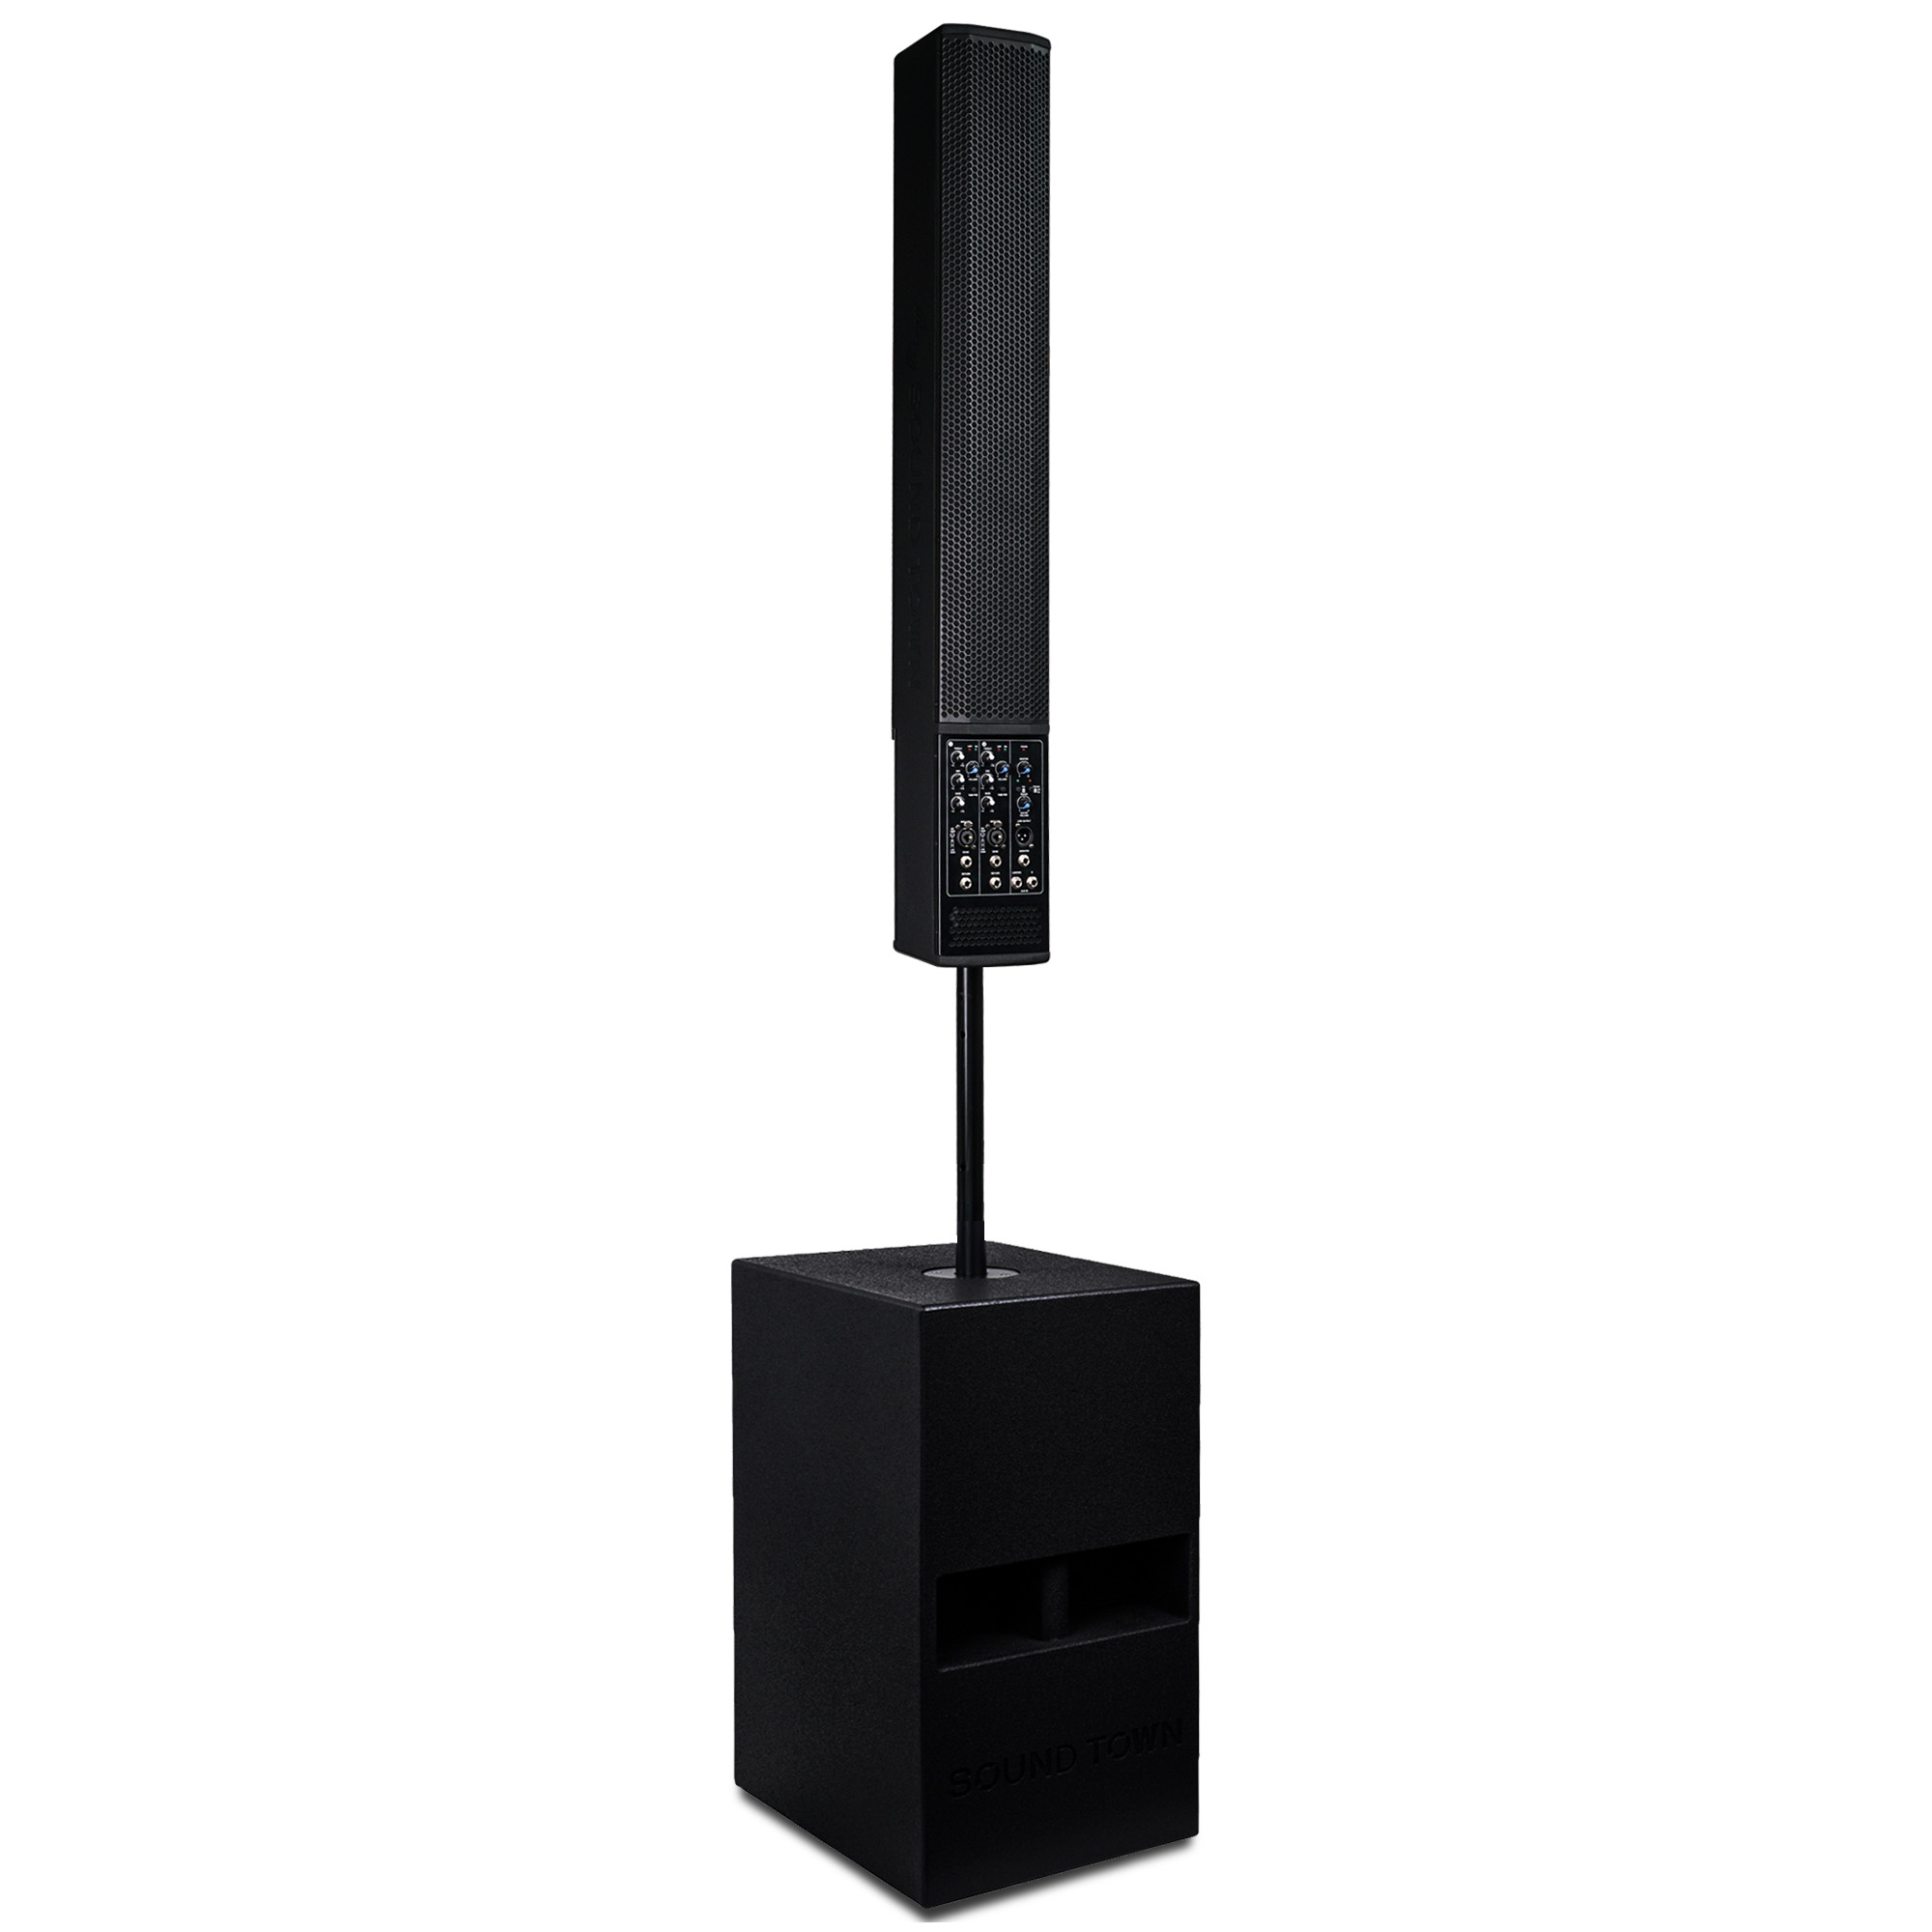 Sound Town Powered Column Speaker Line Array System with One 6 x 5” Column Speaker and One 12” Subwoofer for Live Music, House of Worship, Meeting Rooms, Restaurants - image 1 of 7